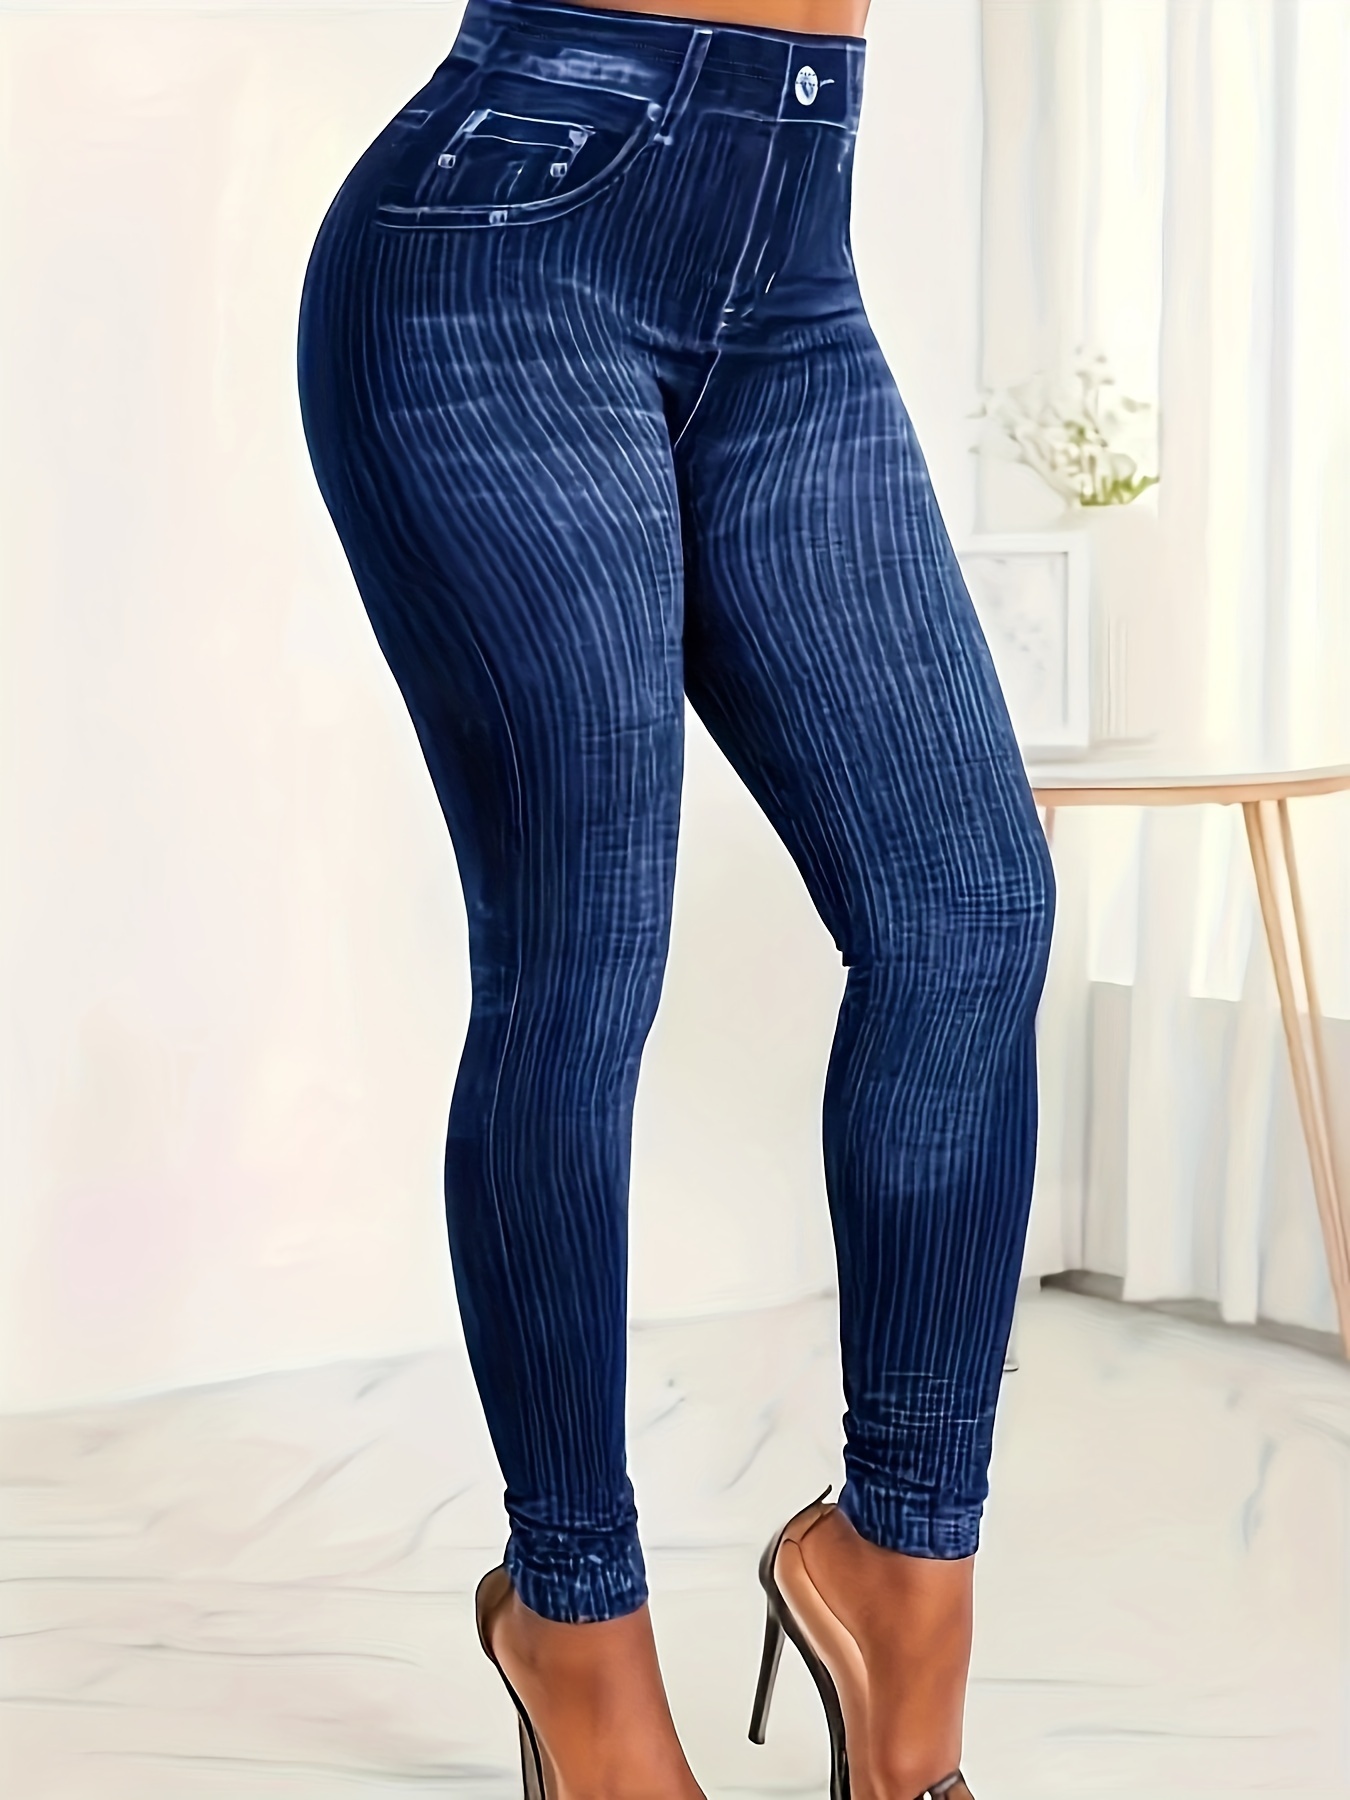 Women's Denim Print Fake Jeans Look Like Leggings Sexy Stretchy High Waist  Slim Fitted Skinny Jeggings Tights Trousers